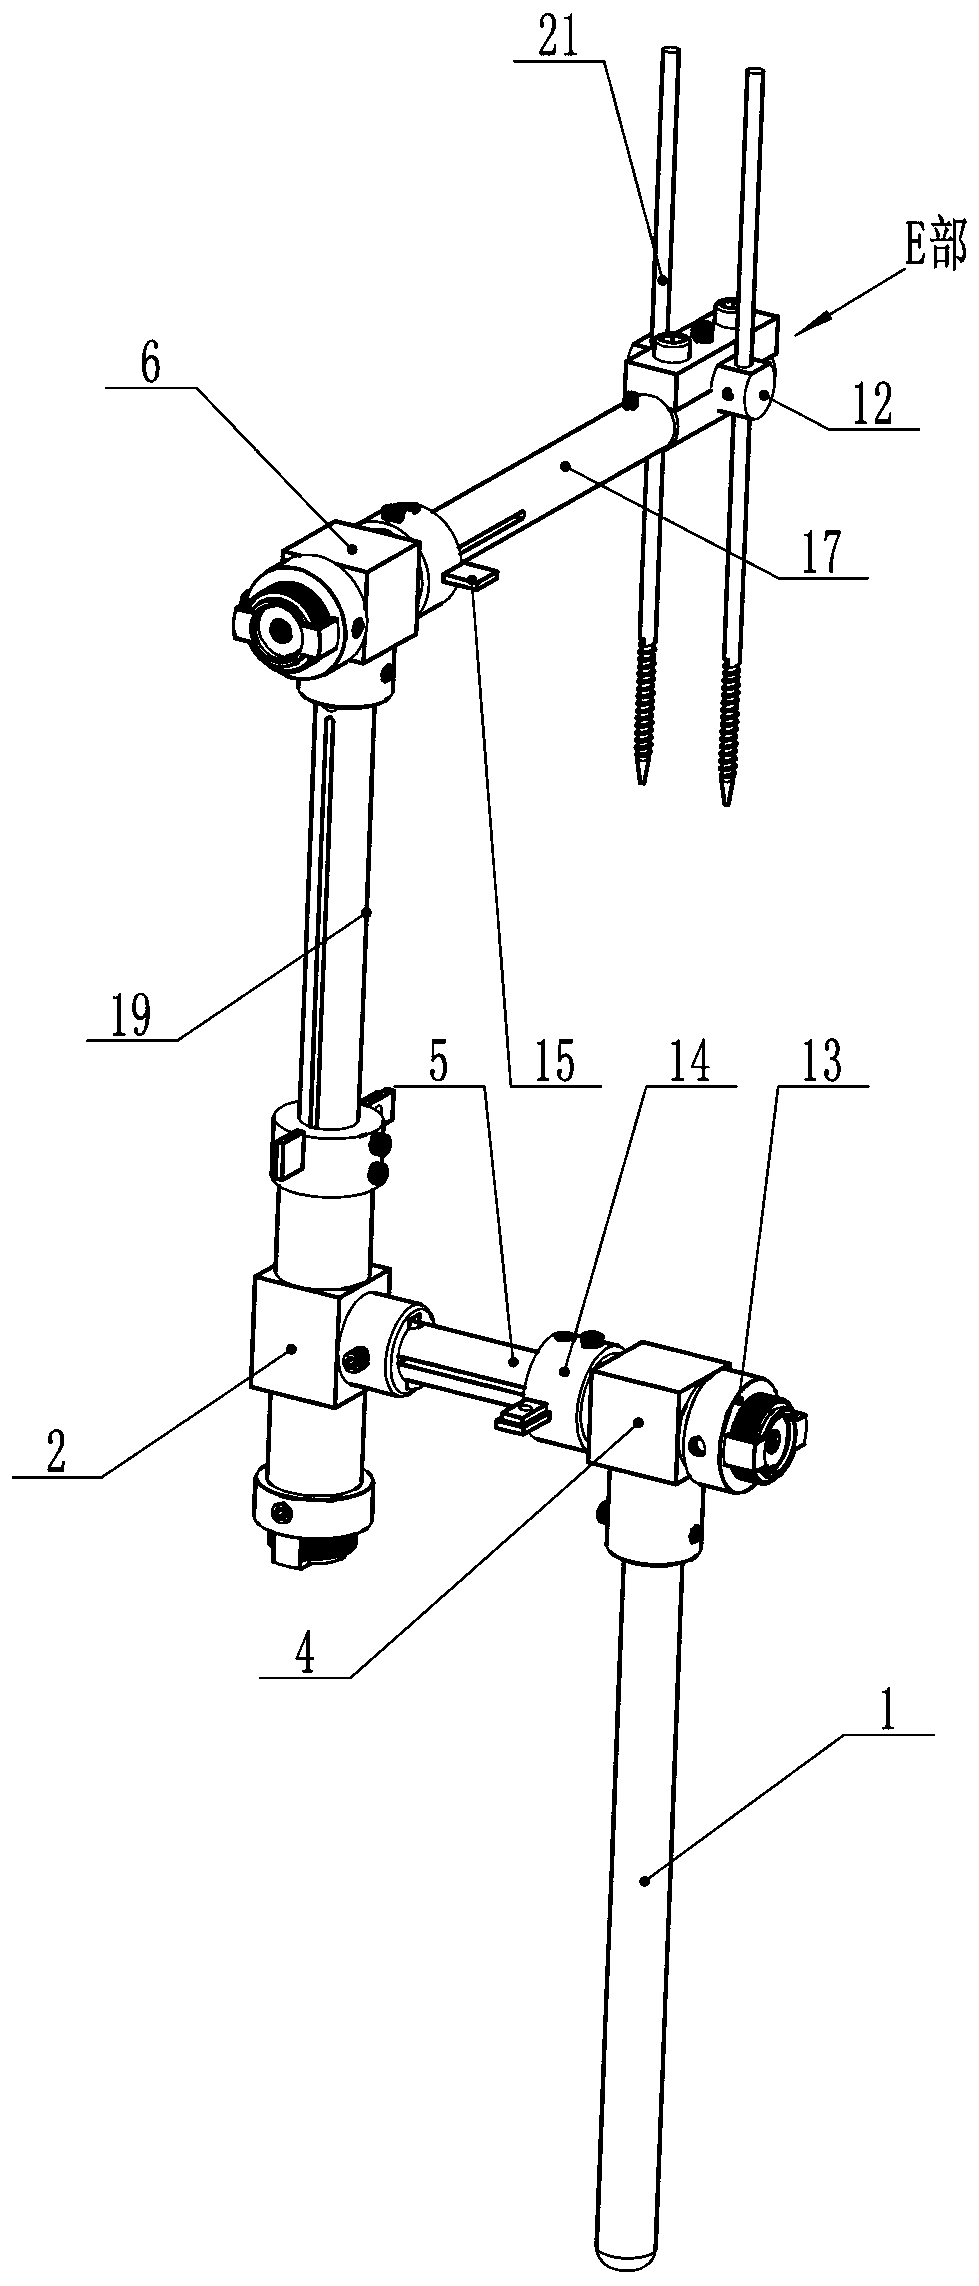 Fracture traction reduction device